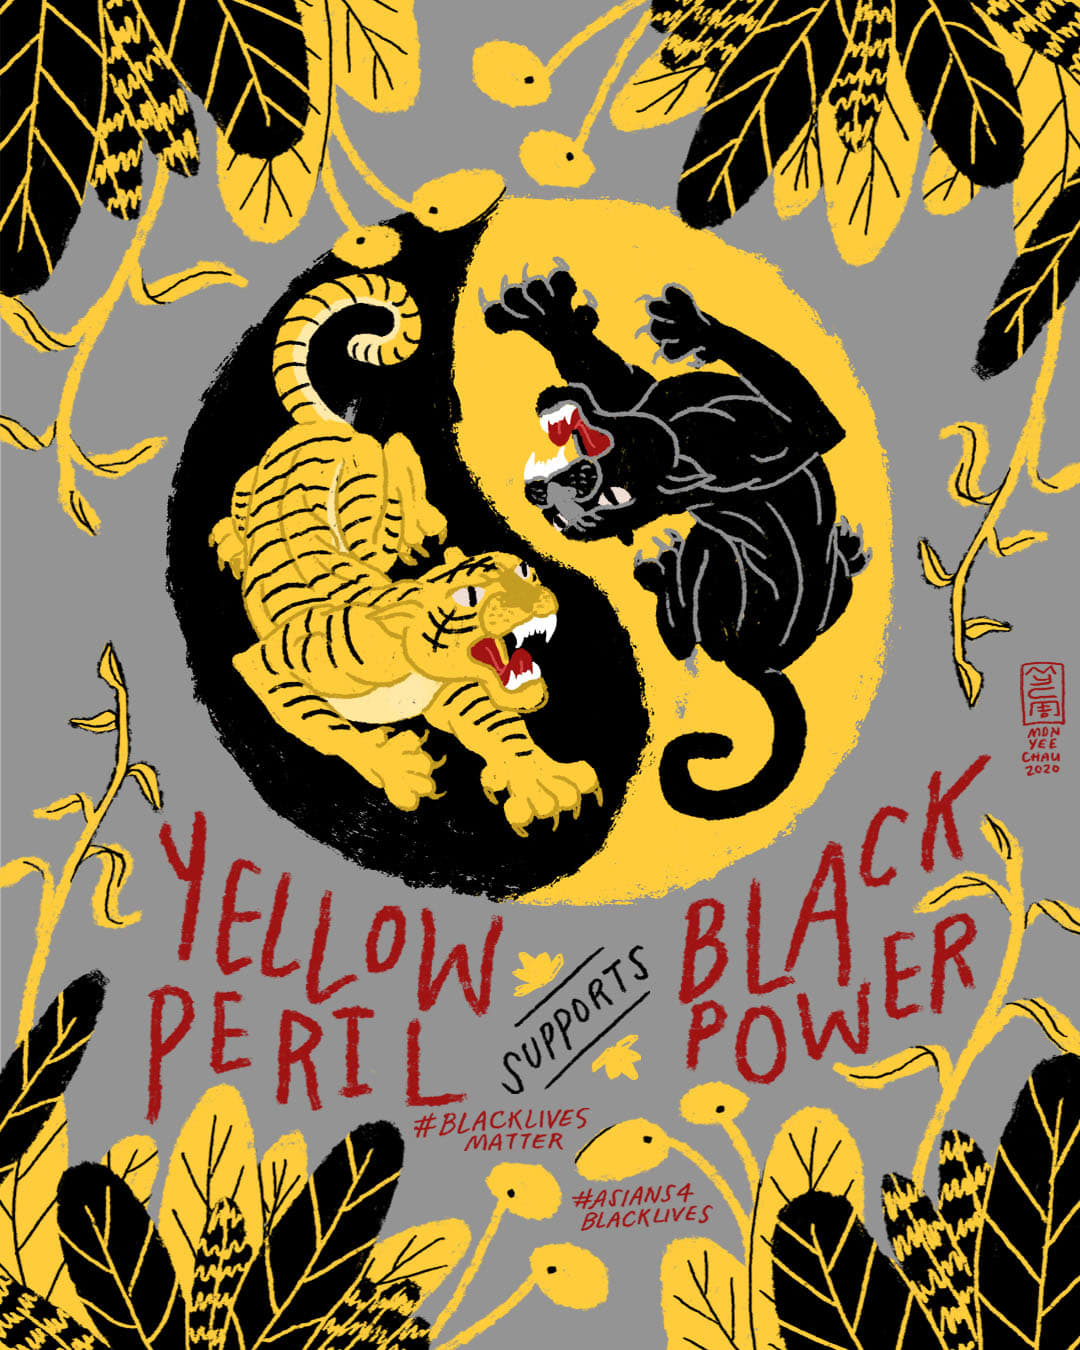 The History Behind Yellow Peril Supports Black Power And Why Some Find It Problematic